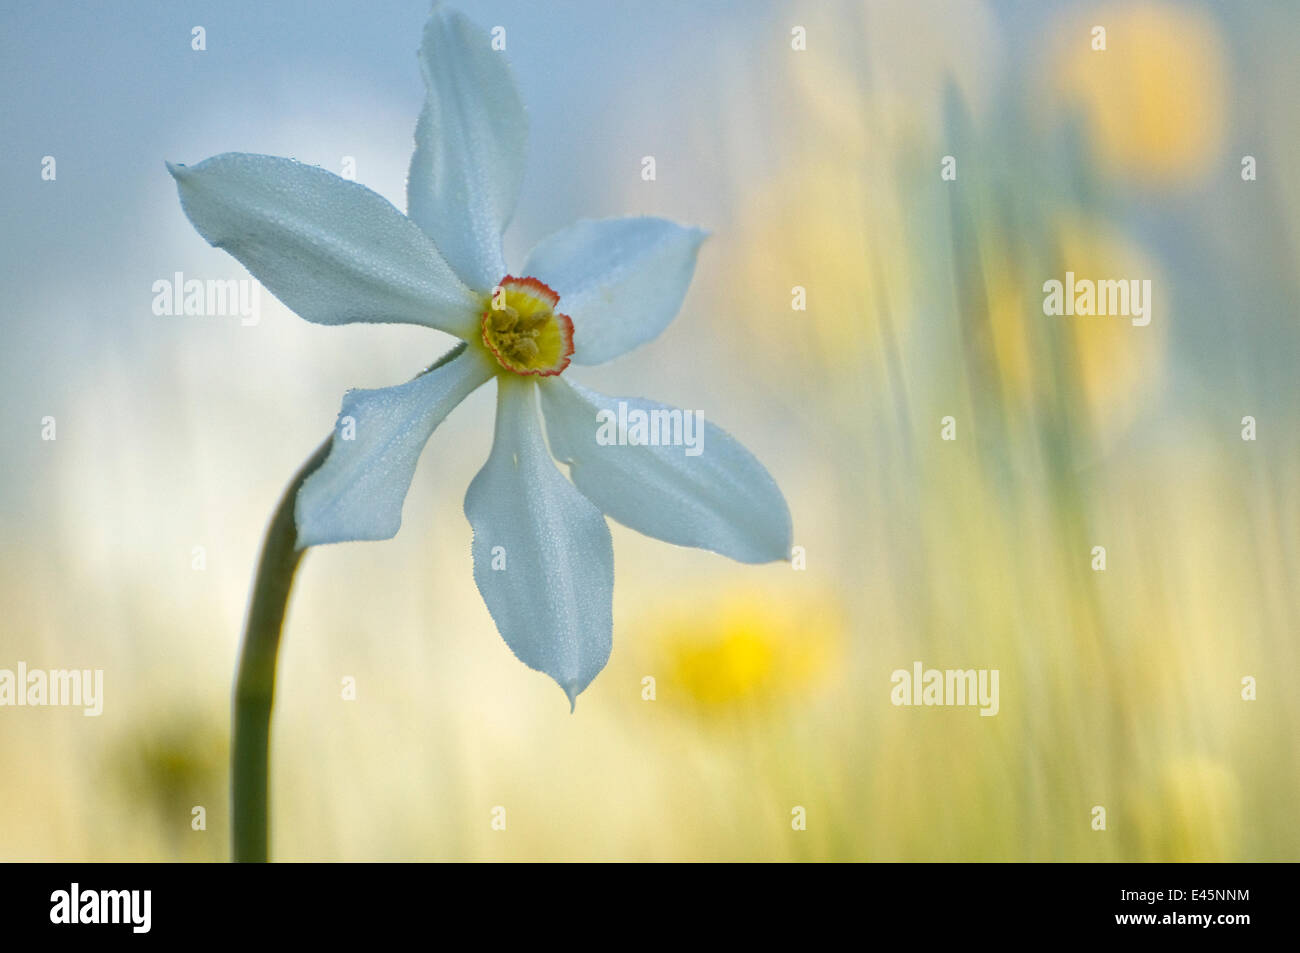 Poet's daffodil (Narcissus poeticus) in flower, Sibillini NP, Italy, May 2009 WWE BOOK. WWE INDOOR EXHIBITION Stock Photo